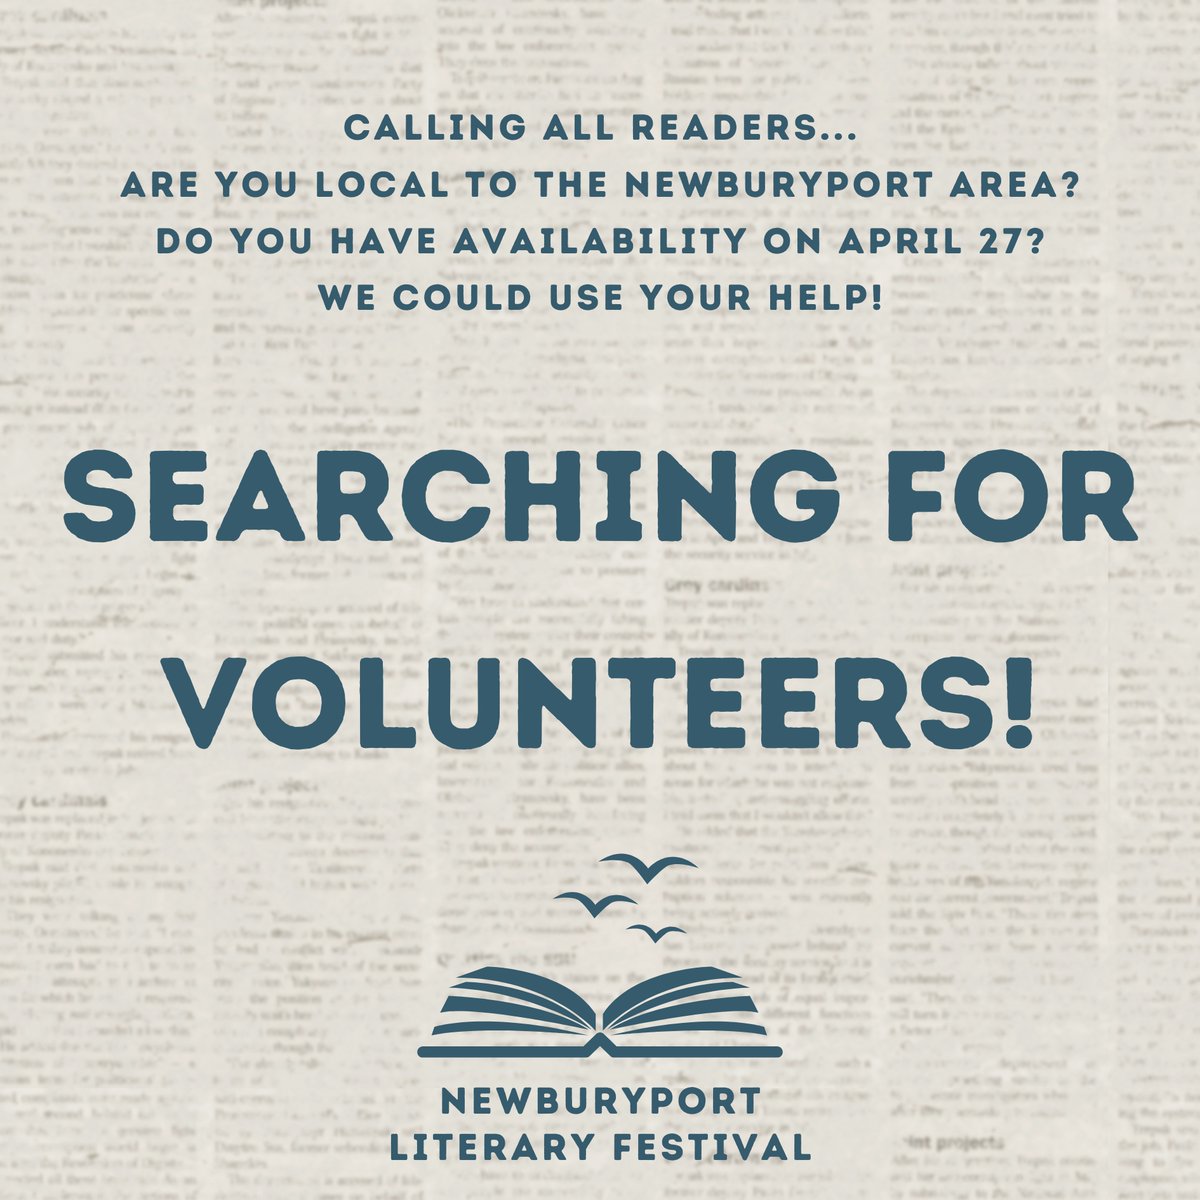 Call for Volunteers! Help needed to staff Literary Festival venues on Saturday 4/27. Support the NLF with a few hours of your time while listening to some of our fantastic authors! Training provided. REGISTER TODAY: newburyportliteraryfestival.org/get-involved/